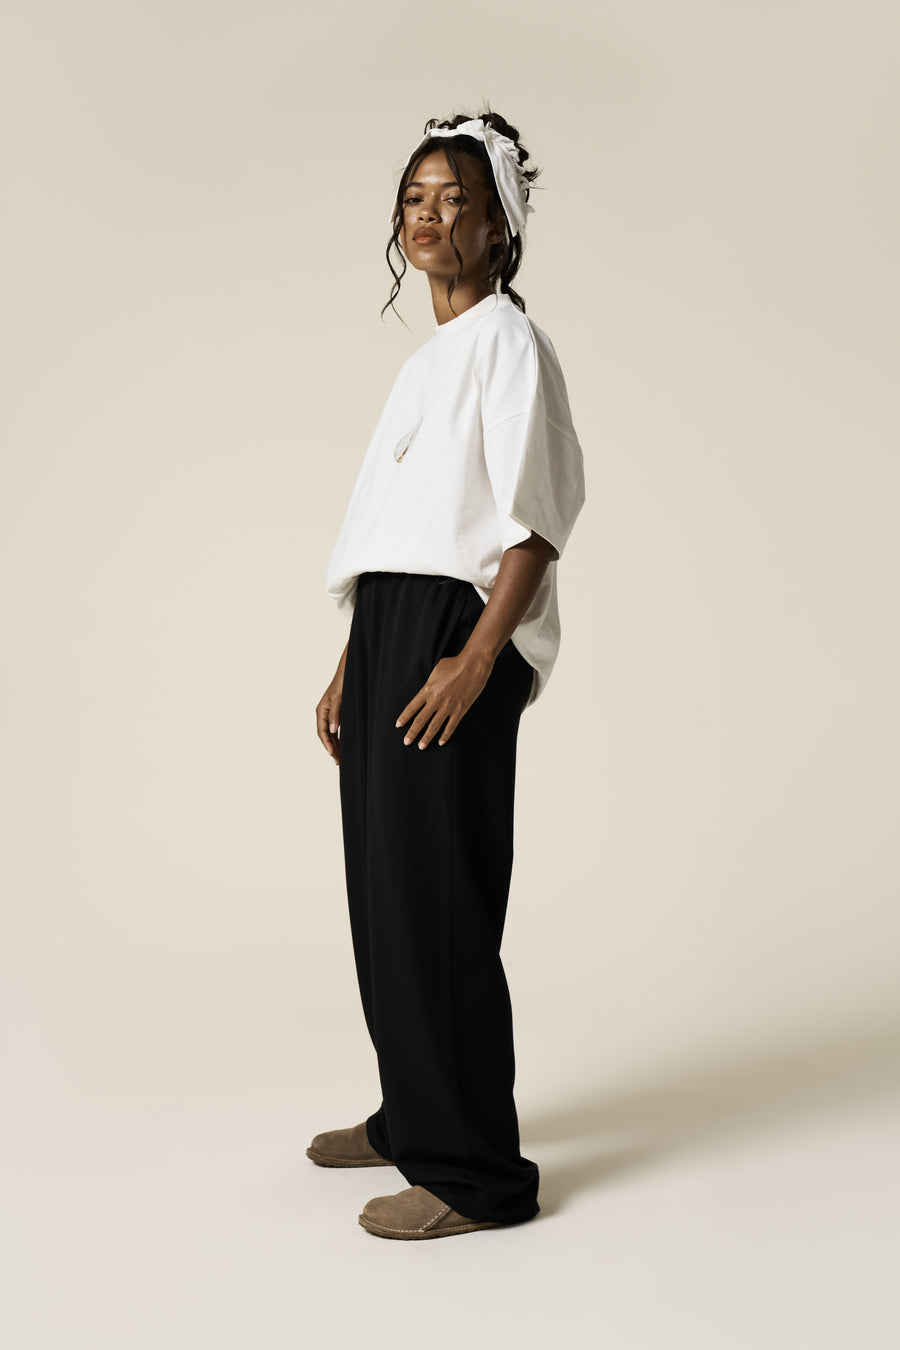 The Fitting Room: Lyndsey's Cannes Wide-Legged Trousers